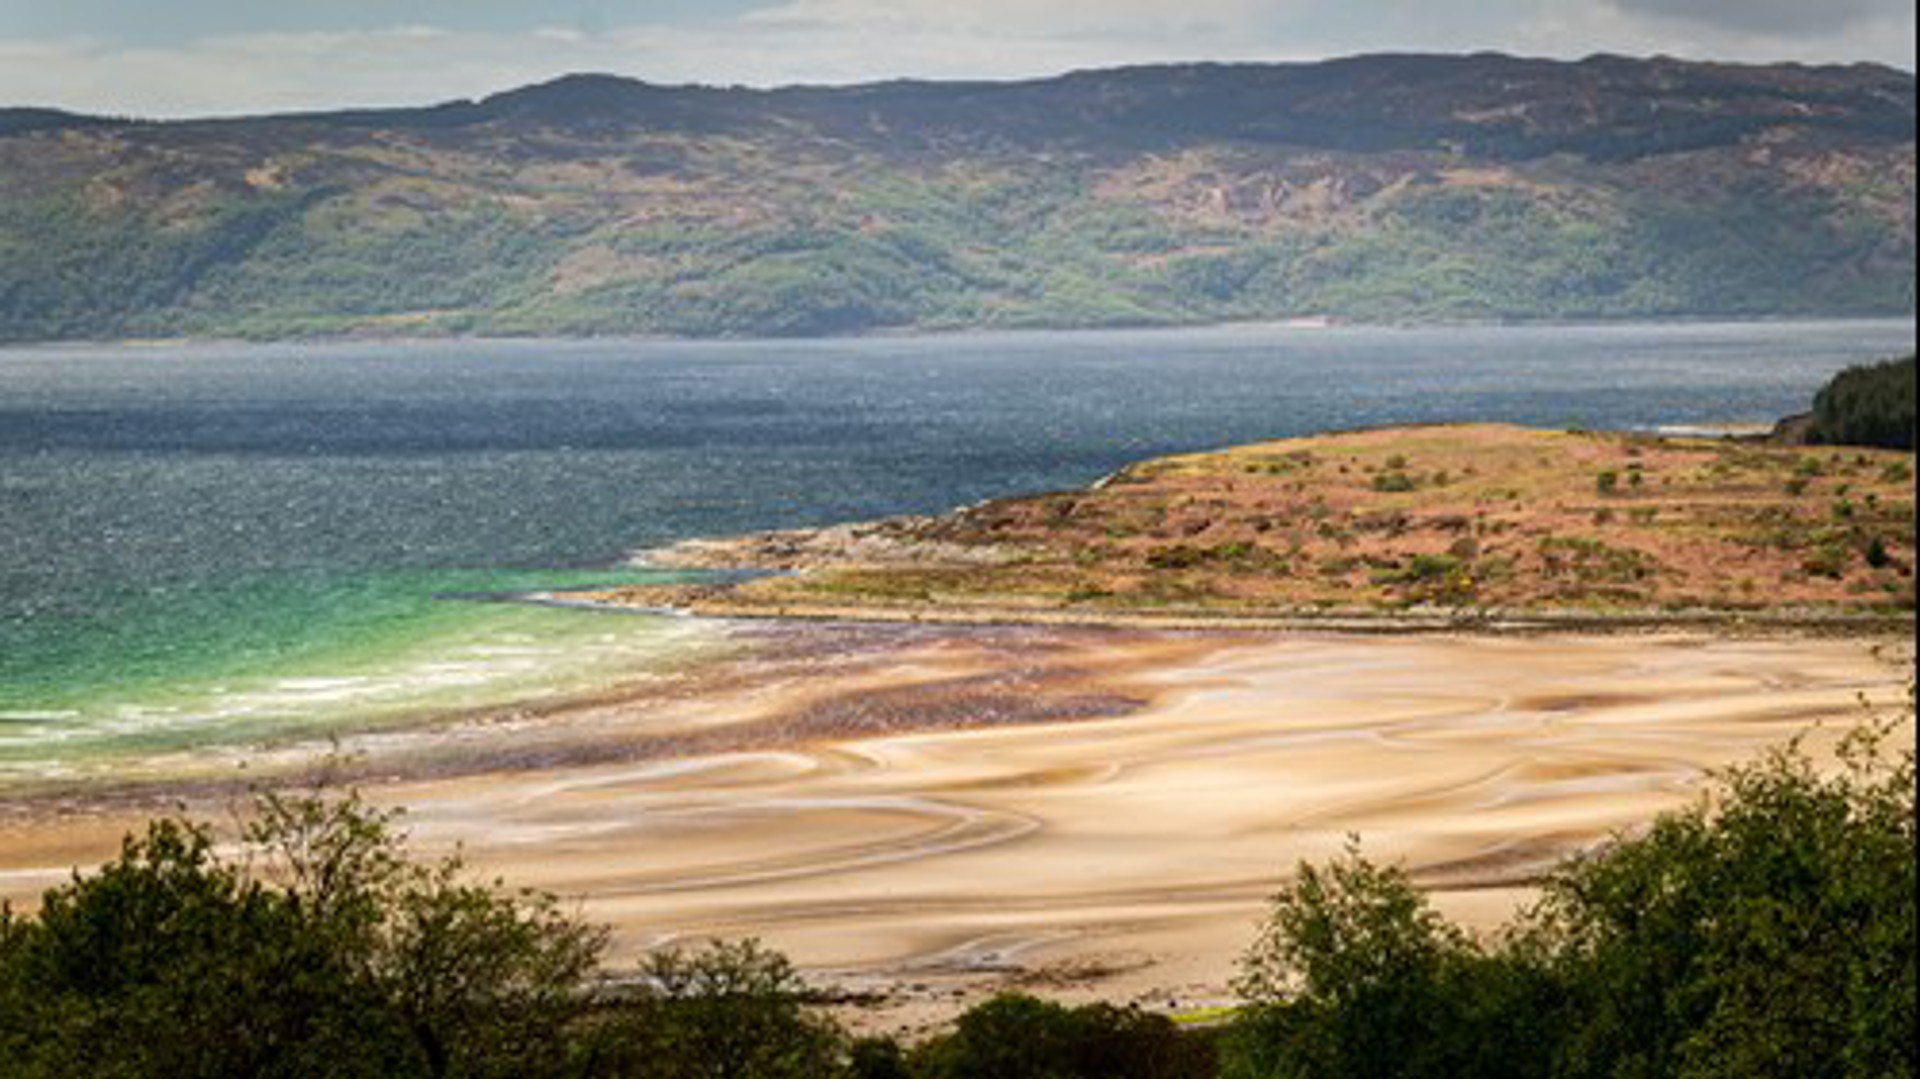 Background image - Ostel Bay Cowal Kevin Mcgarry